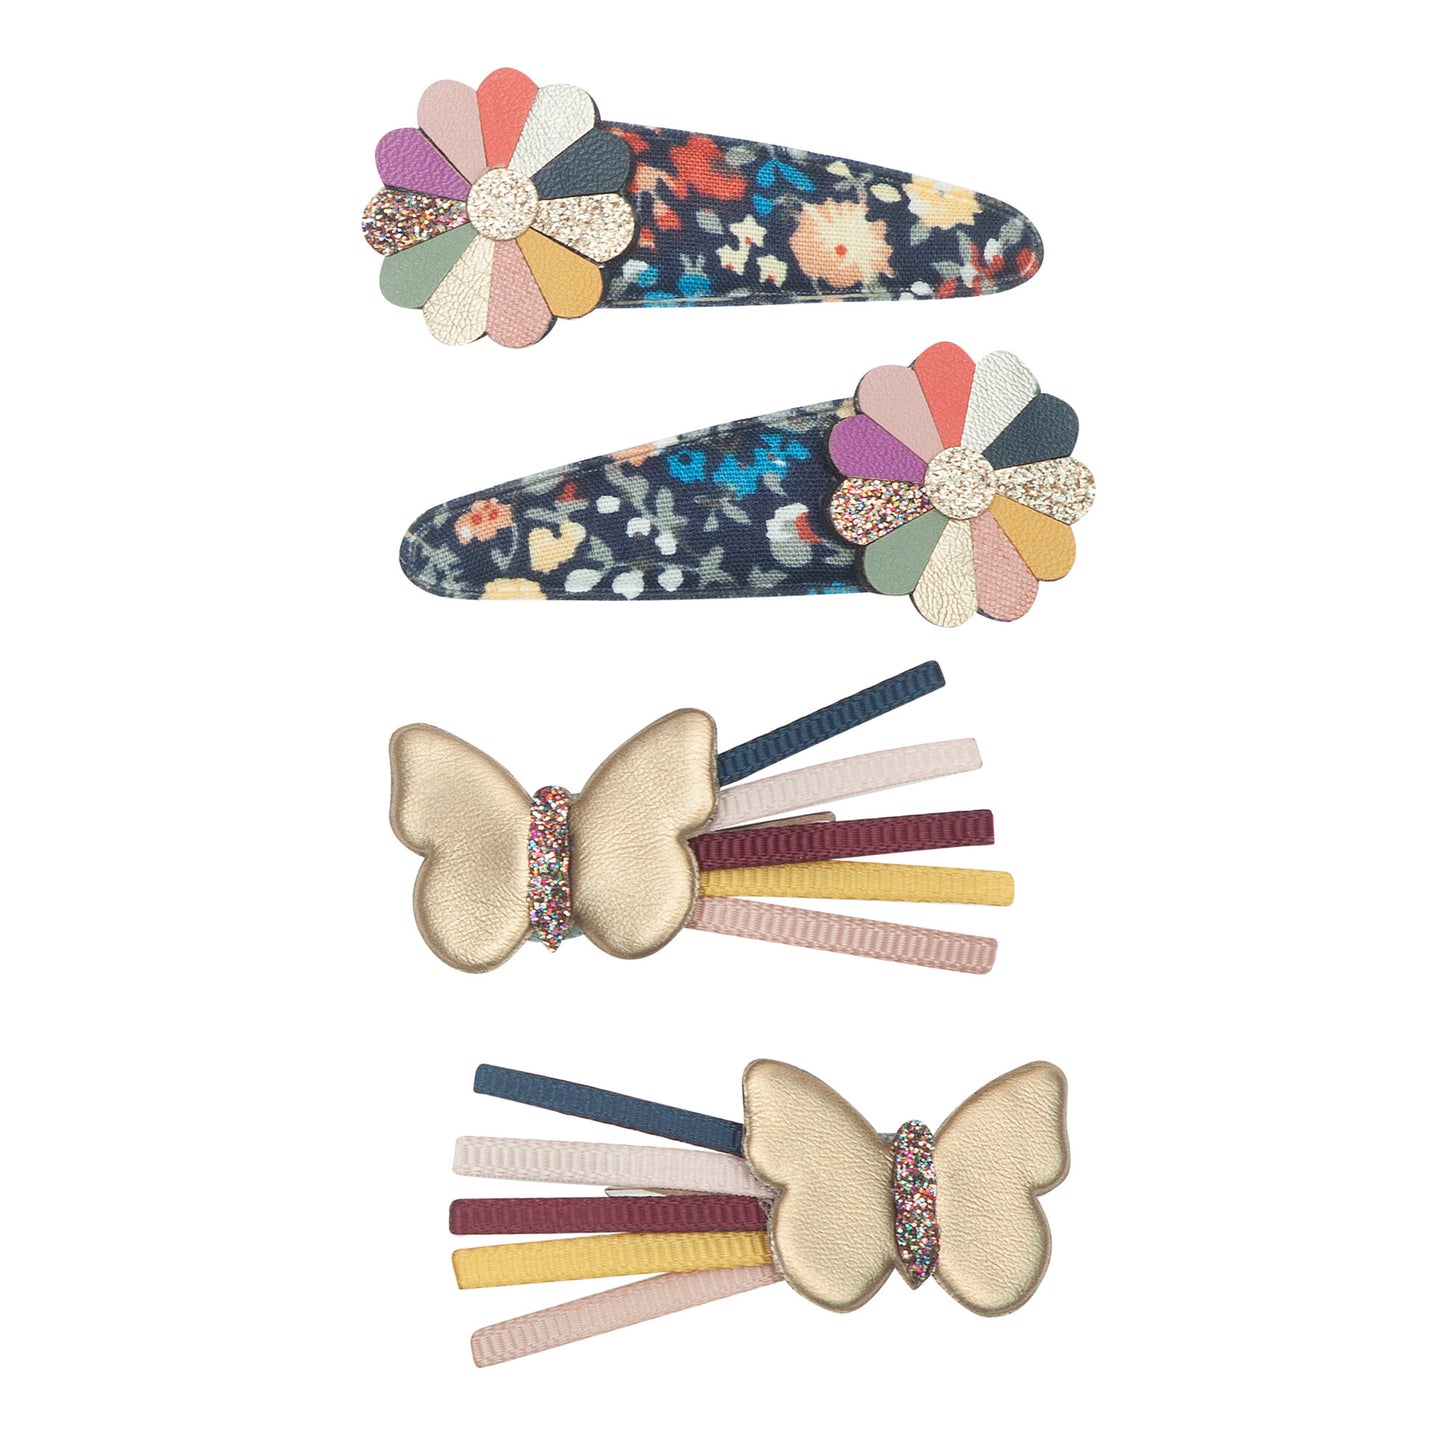 Two intricately crafted dazzling flower heads and two super sweet golden butterflies, the perfect clip pack to suit every mood! These versatile clips are just perfect for every day.